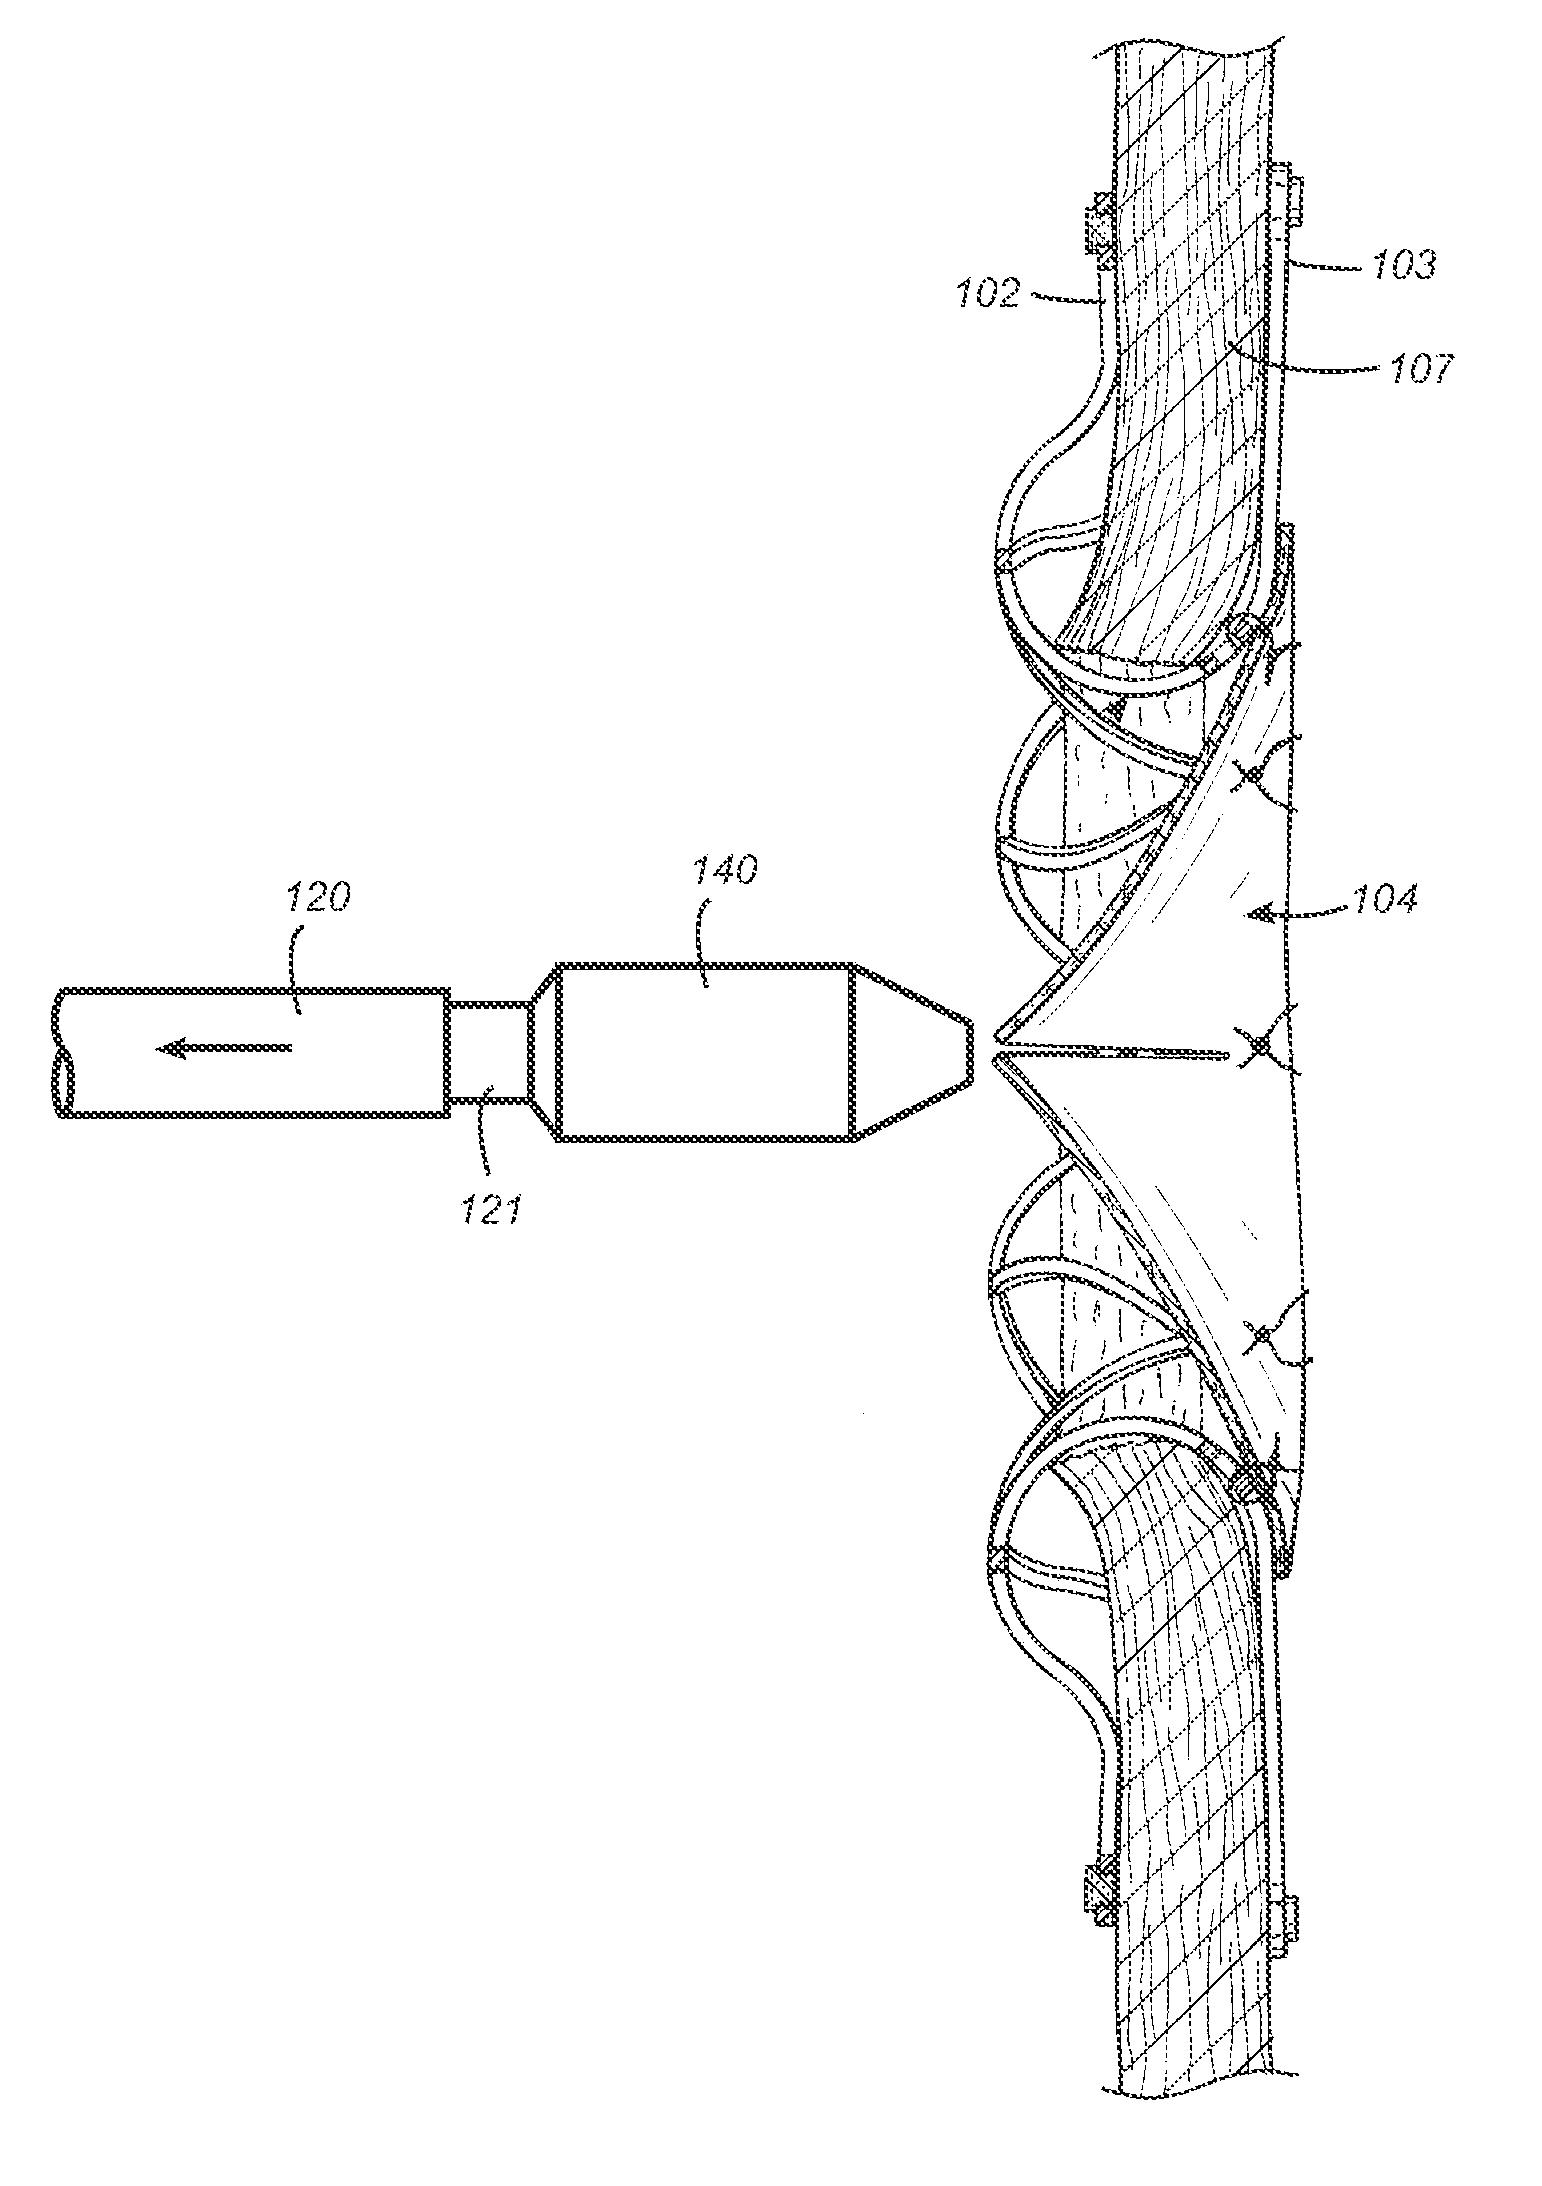 Mounting tool for loading a prosthesis